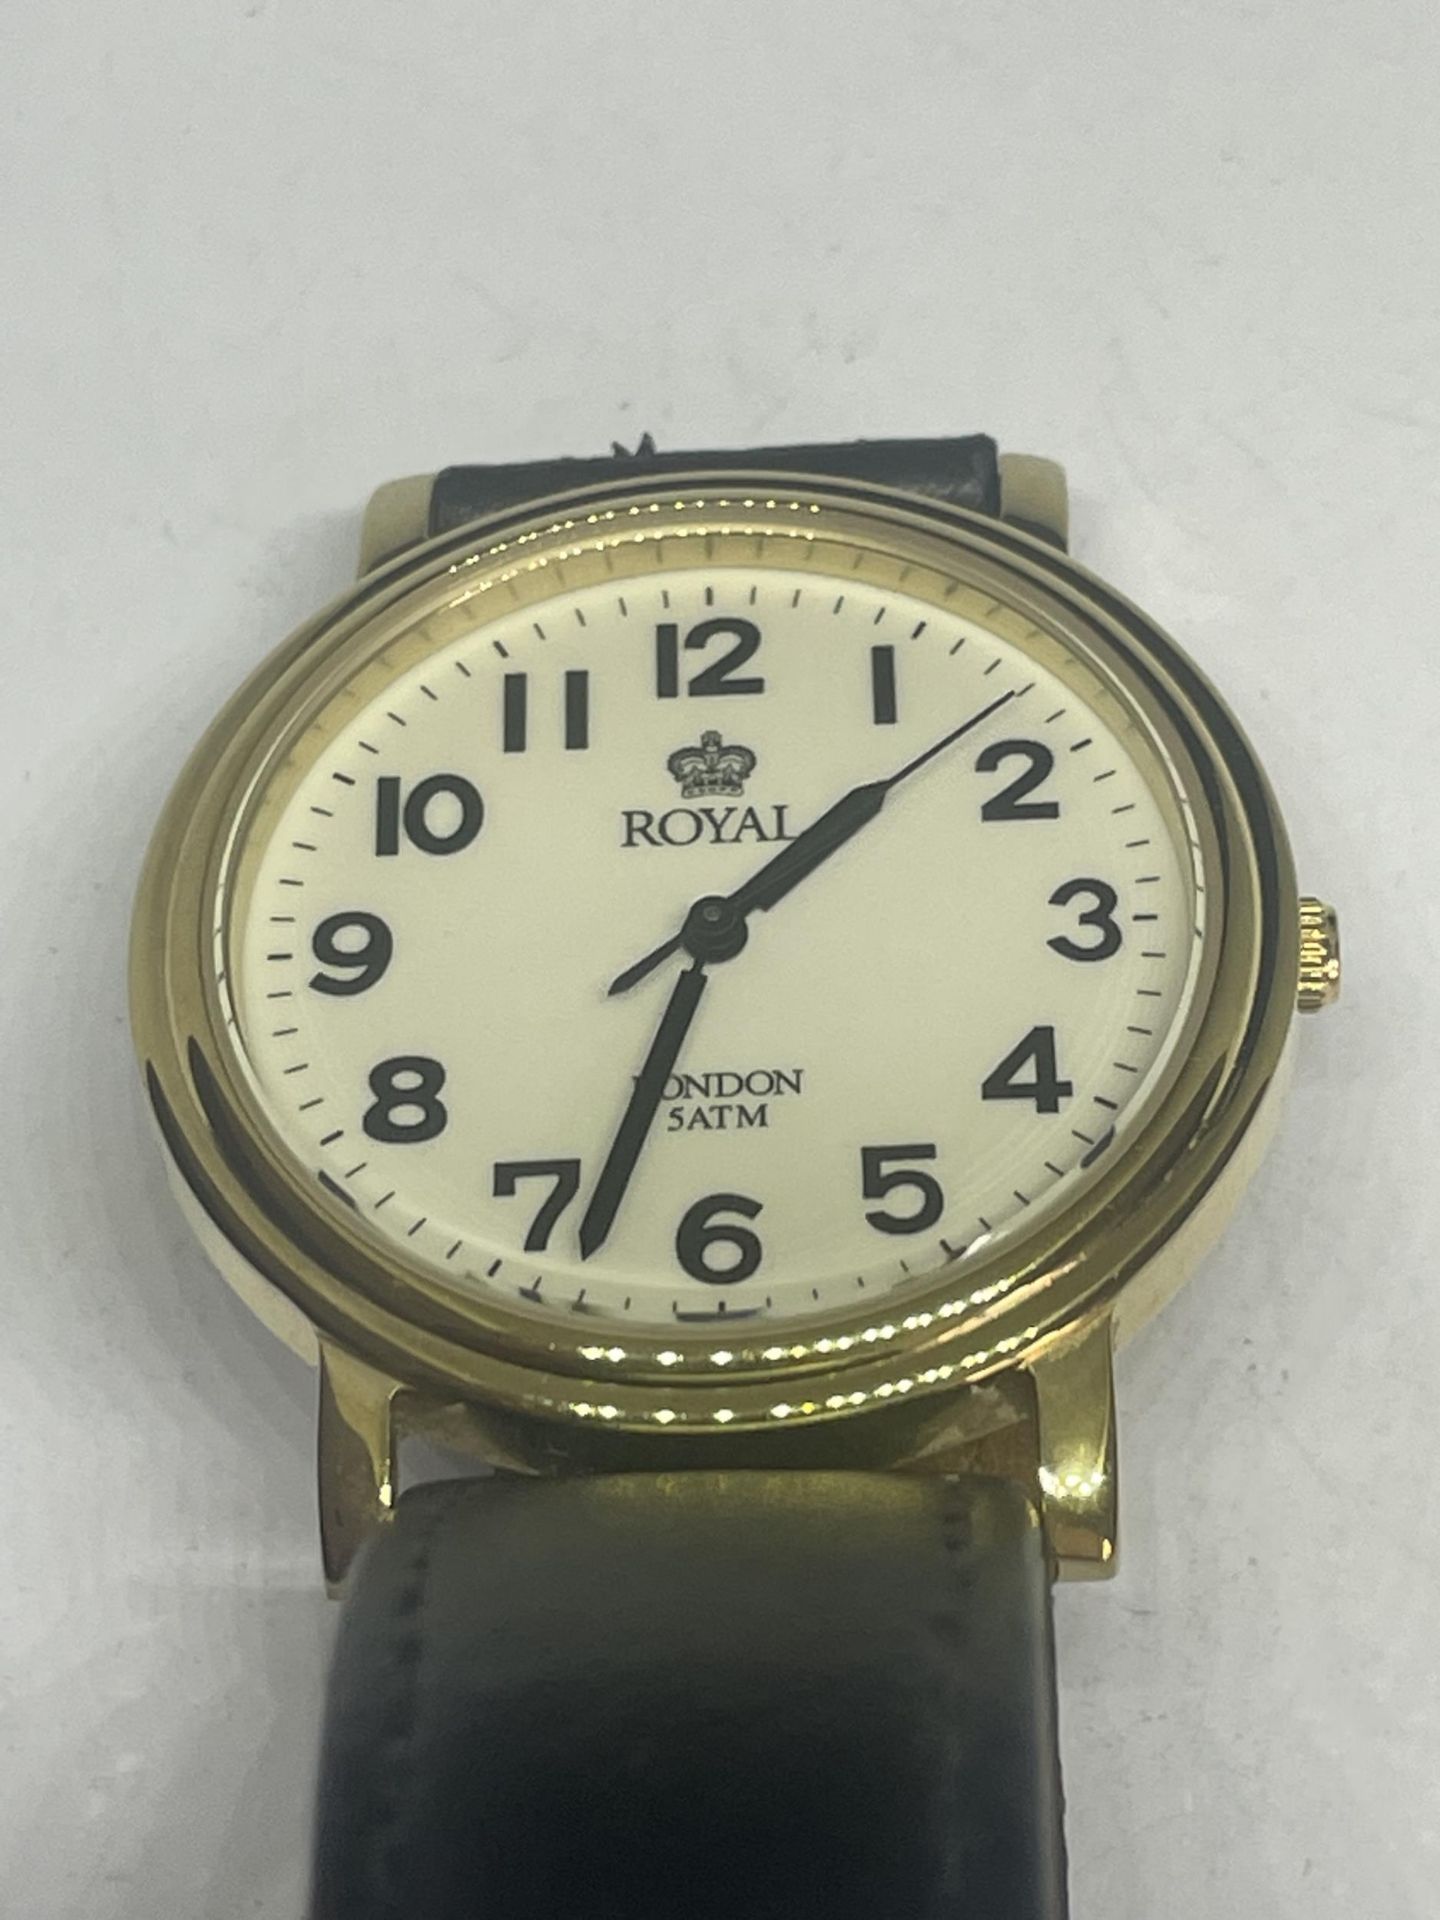 A ROYAL LONDON WRSIT WATCH WITH BLACK LEATHER STRAP SEEN WORKING BUT NO WARRANTY - Image 2 of 3